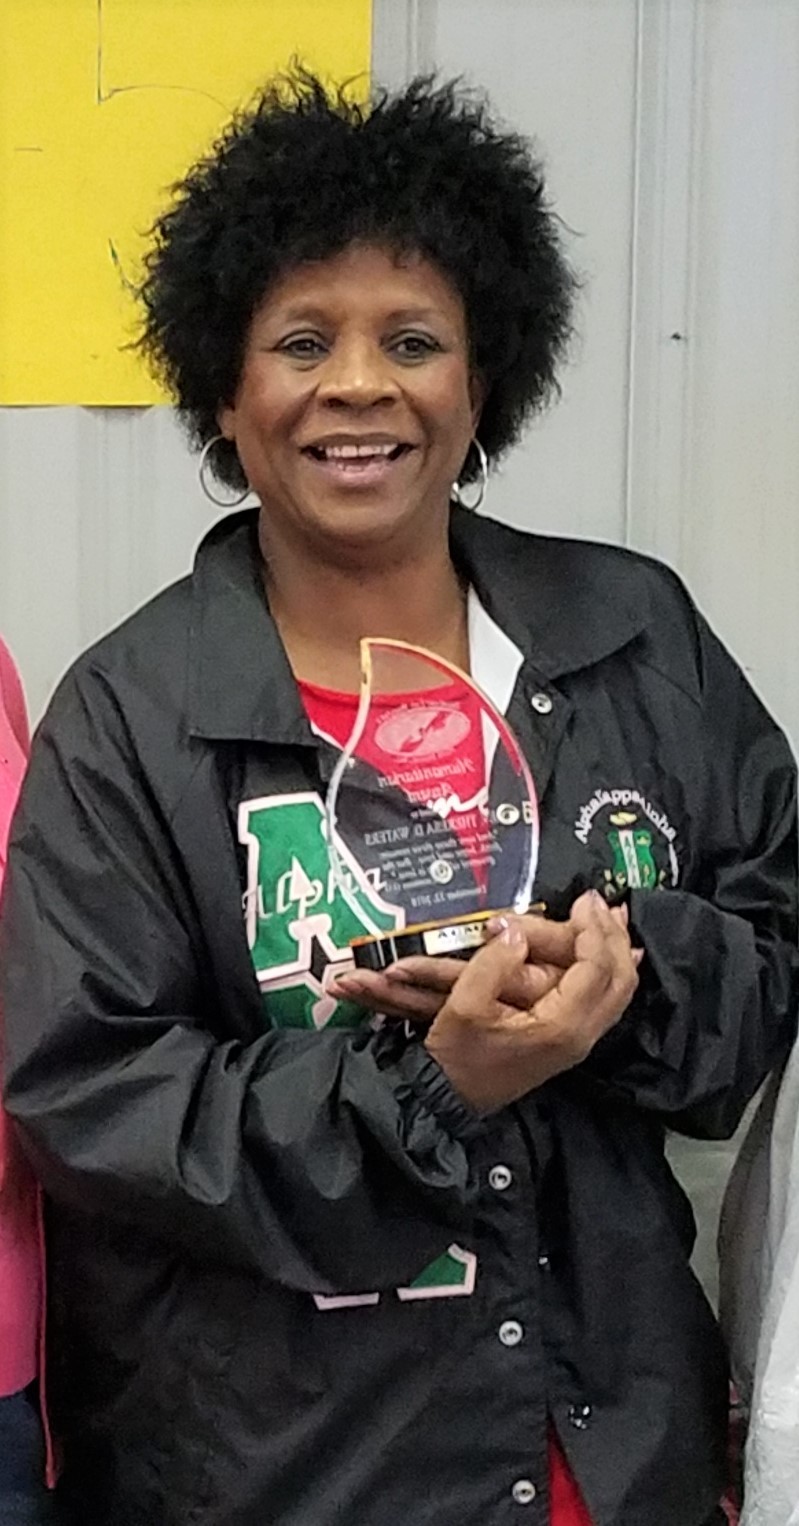 Rev. Theresa Waters poses with the 2018 Humanitarian Award, which was sponsored by ponsored by Community Partnership for Children Inc. and Abundant Life Ministries Inc. Photo courtesy of Myra Valentine